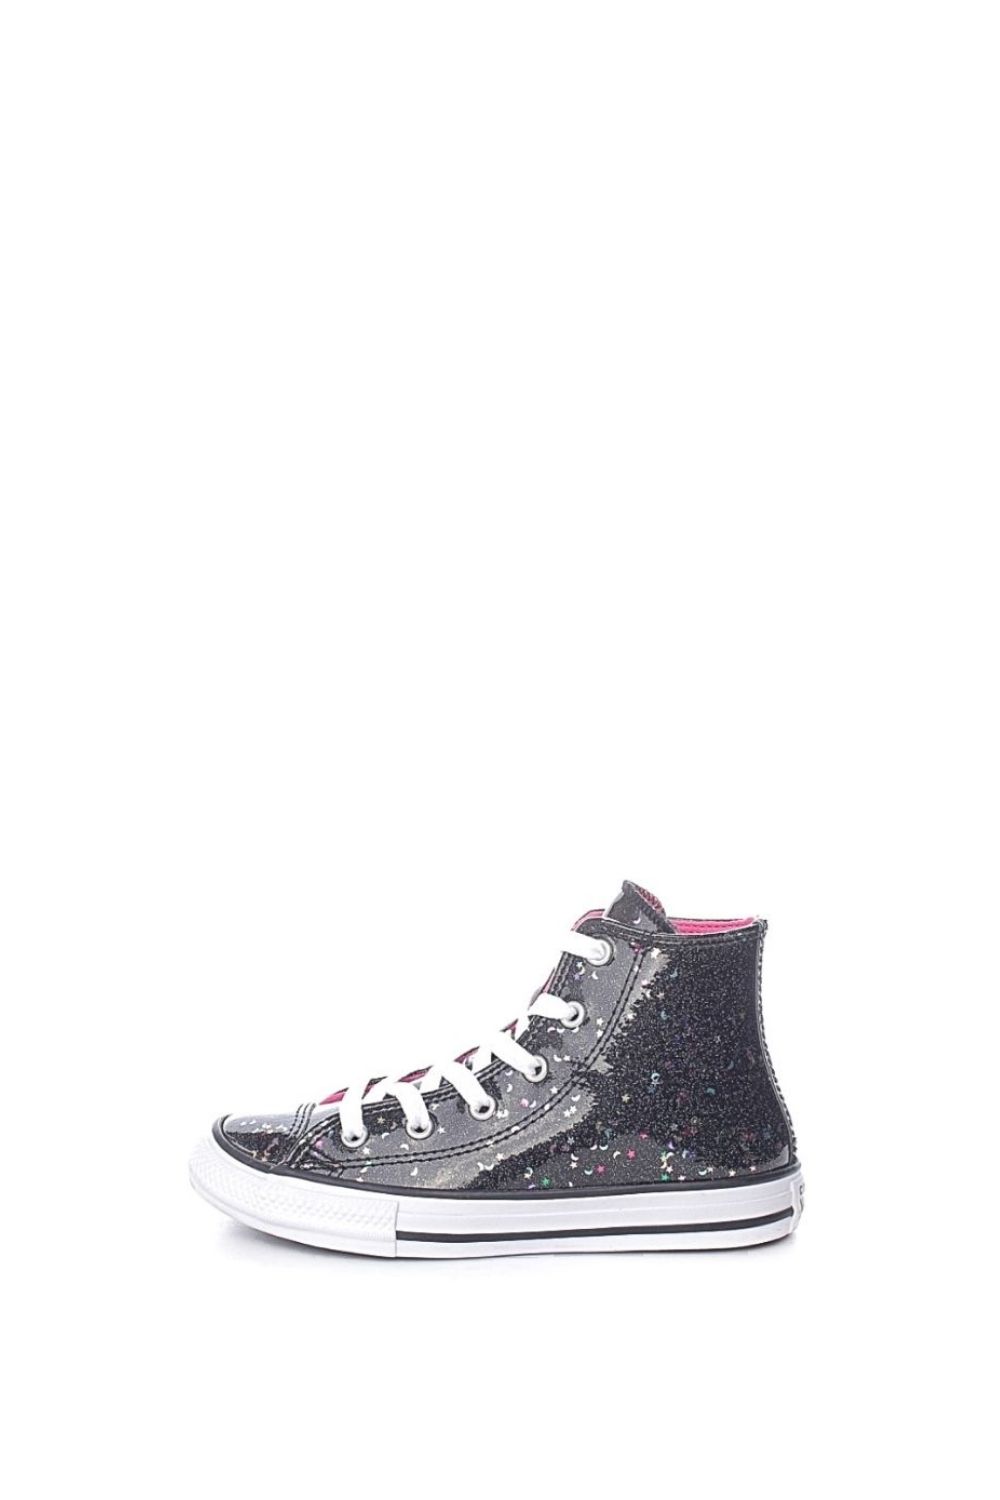 CONVERSE – Παιδικά μποτάκια sneakers CONVERSE CHUCK TAYLOR ALL STAR μαύρα 1726078.0-0871